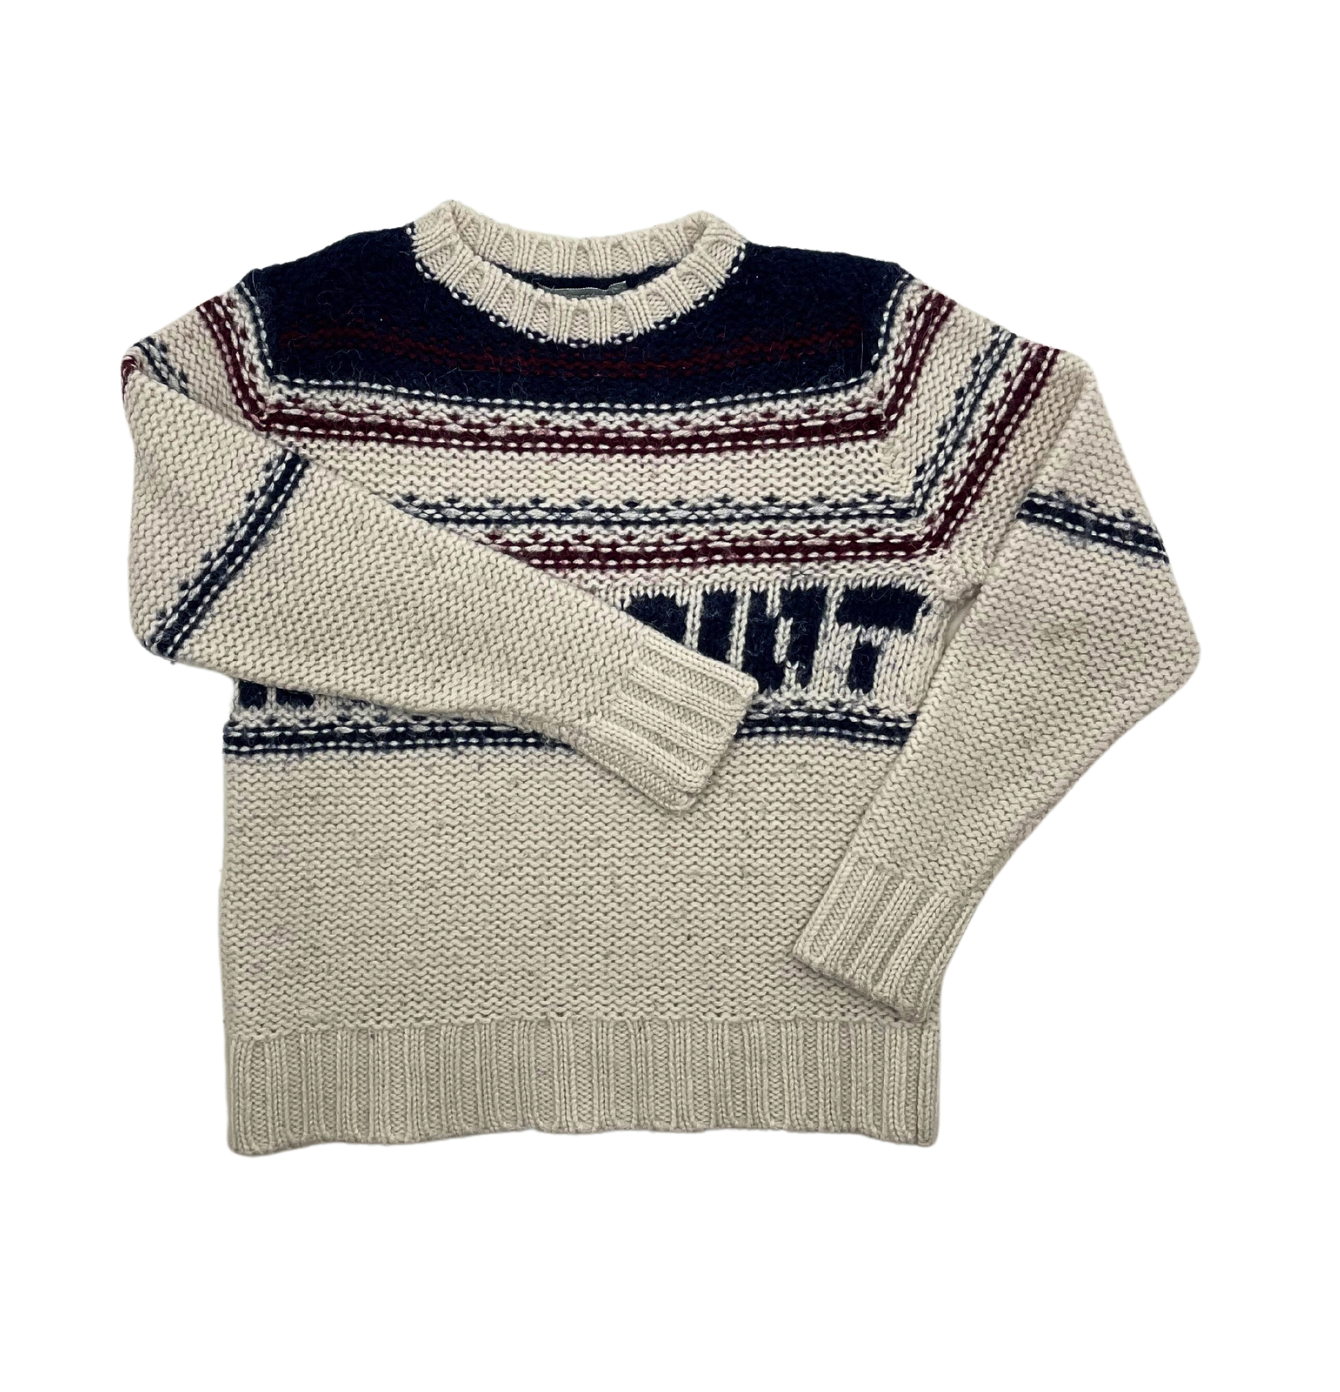 BONPOINT - Thick patterned jumper - 8 years old